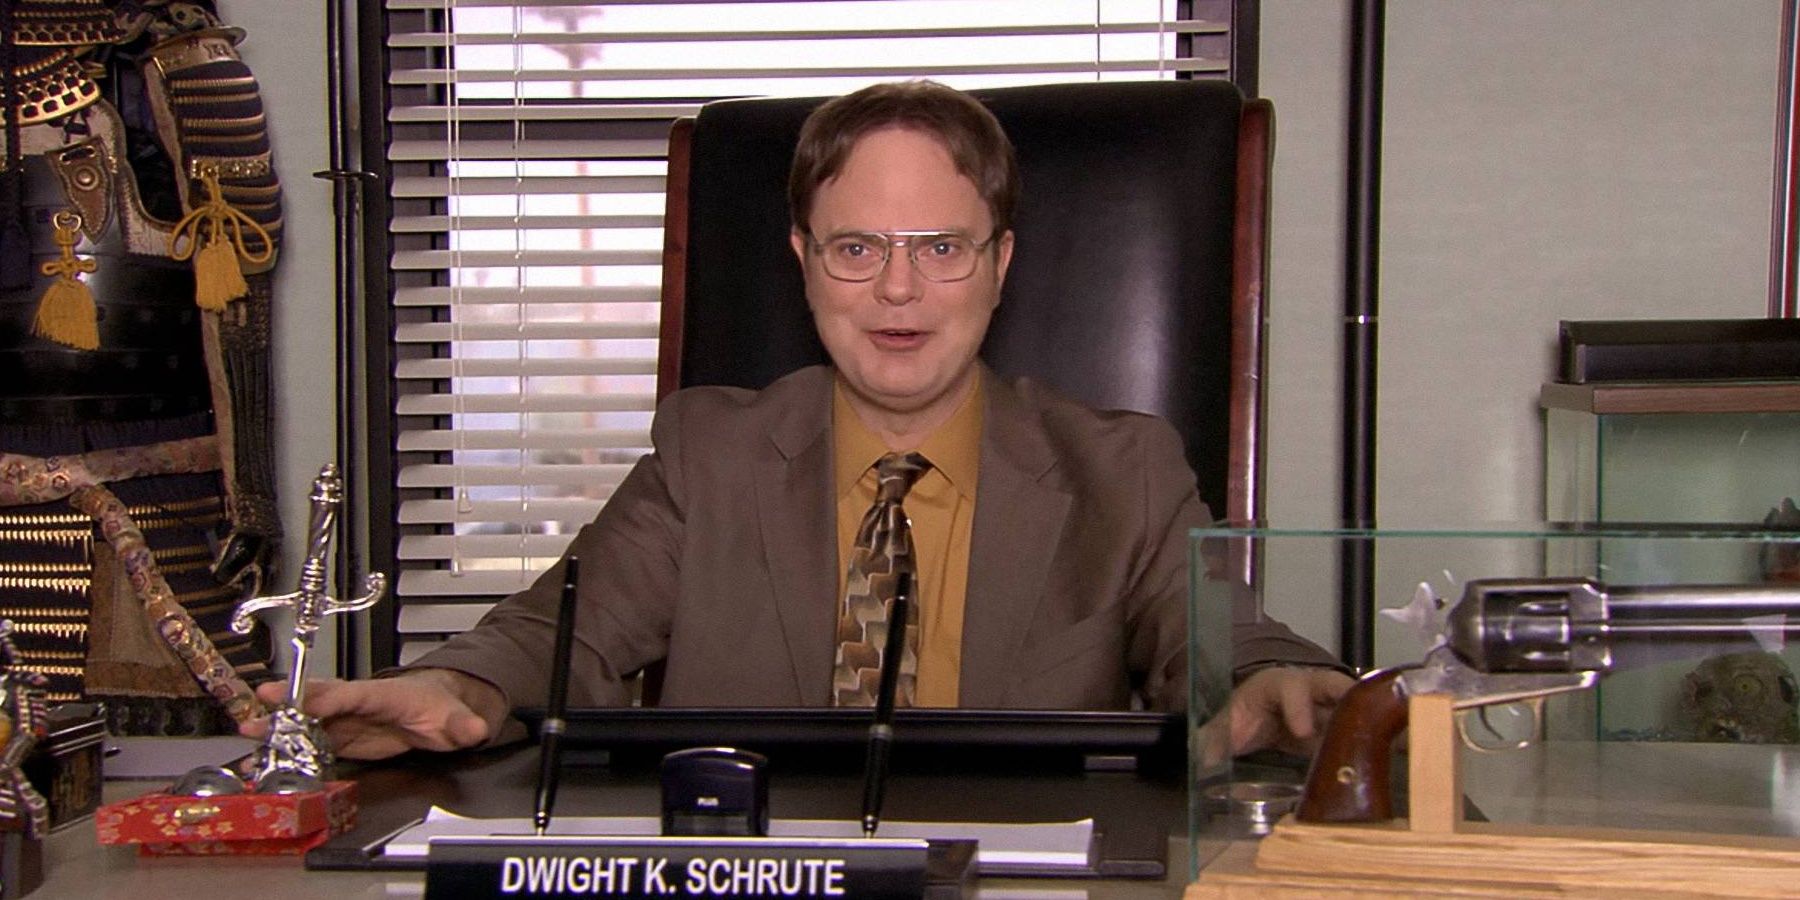 Dwight excitedly sits in his office as manager of Dunder Mifflin in The Office